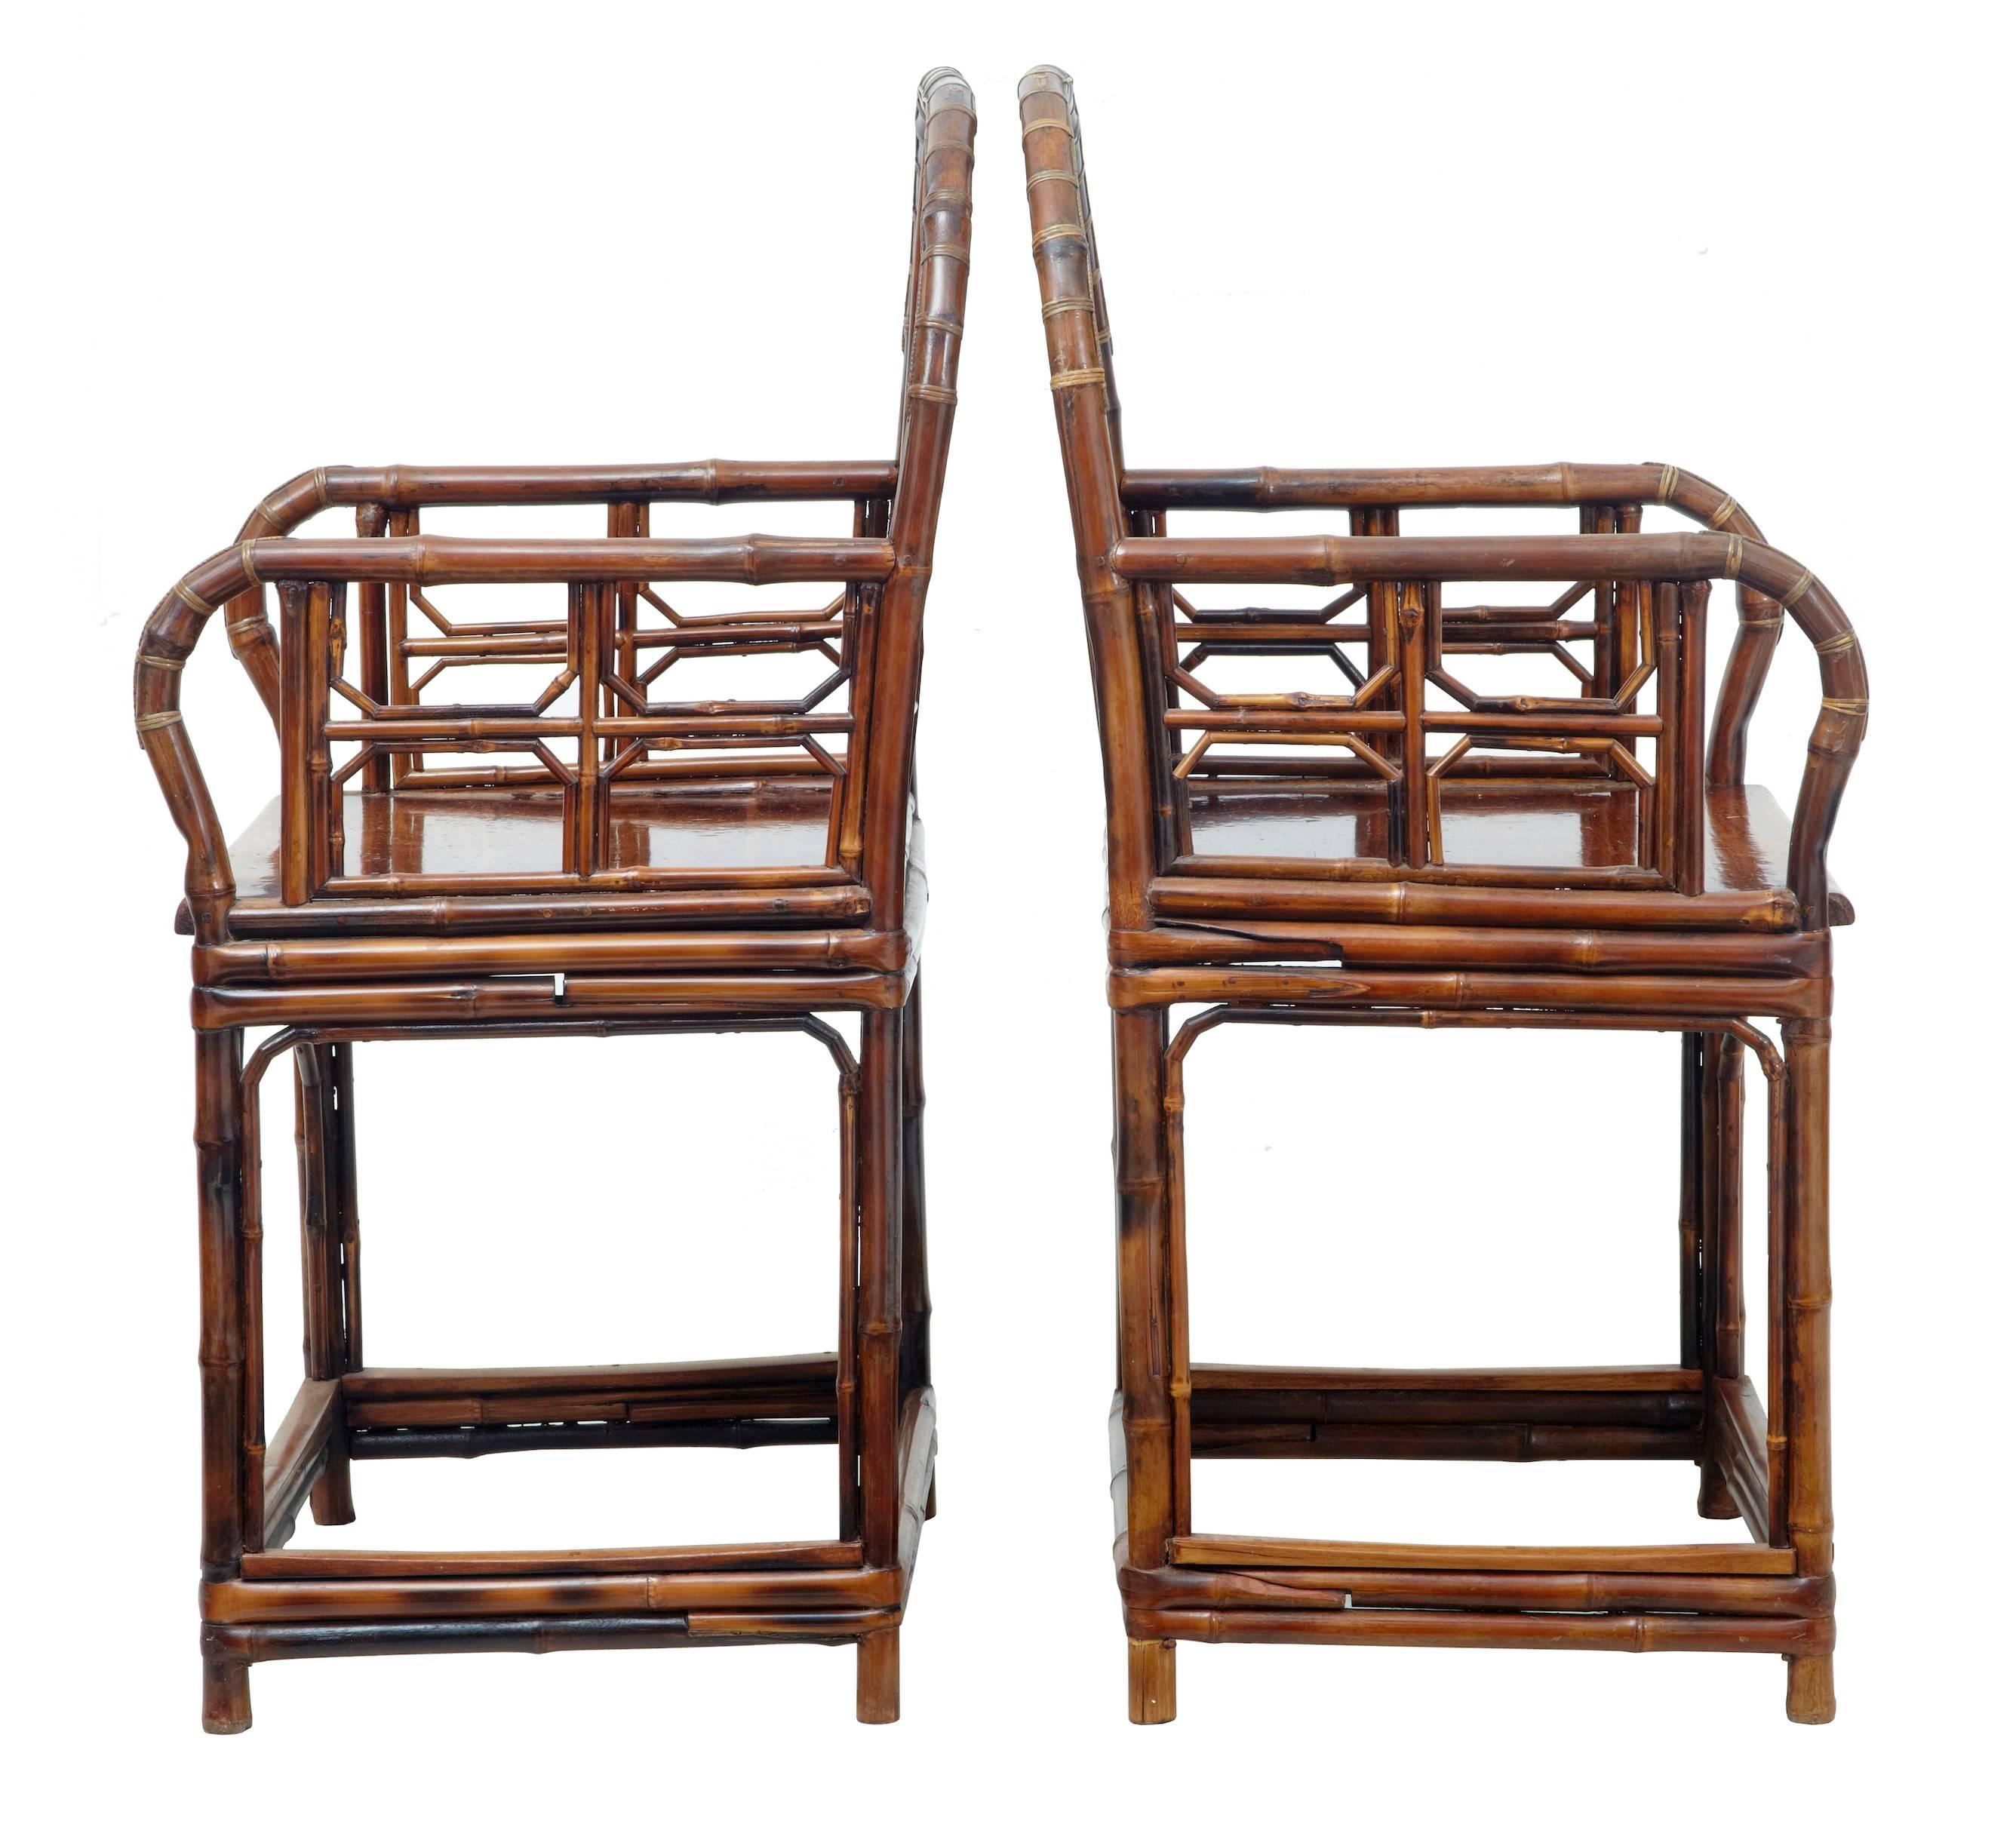 Good quality pair of bamboo cane work chairs, circa 1880.
Cane work arranged in a pattern on the backrest.
Bamboo shaped arms and bound by twine.
Legs united and reinforced by cane work.
Some minor restoration to the hardwood seats.

Measures: